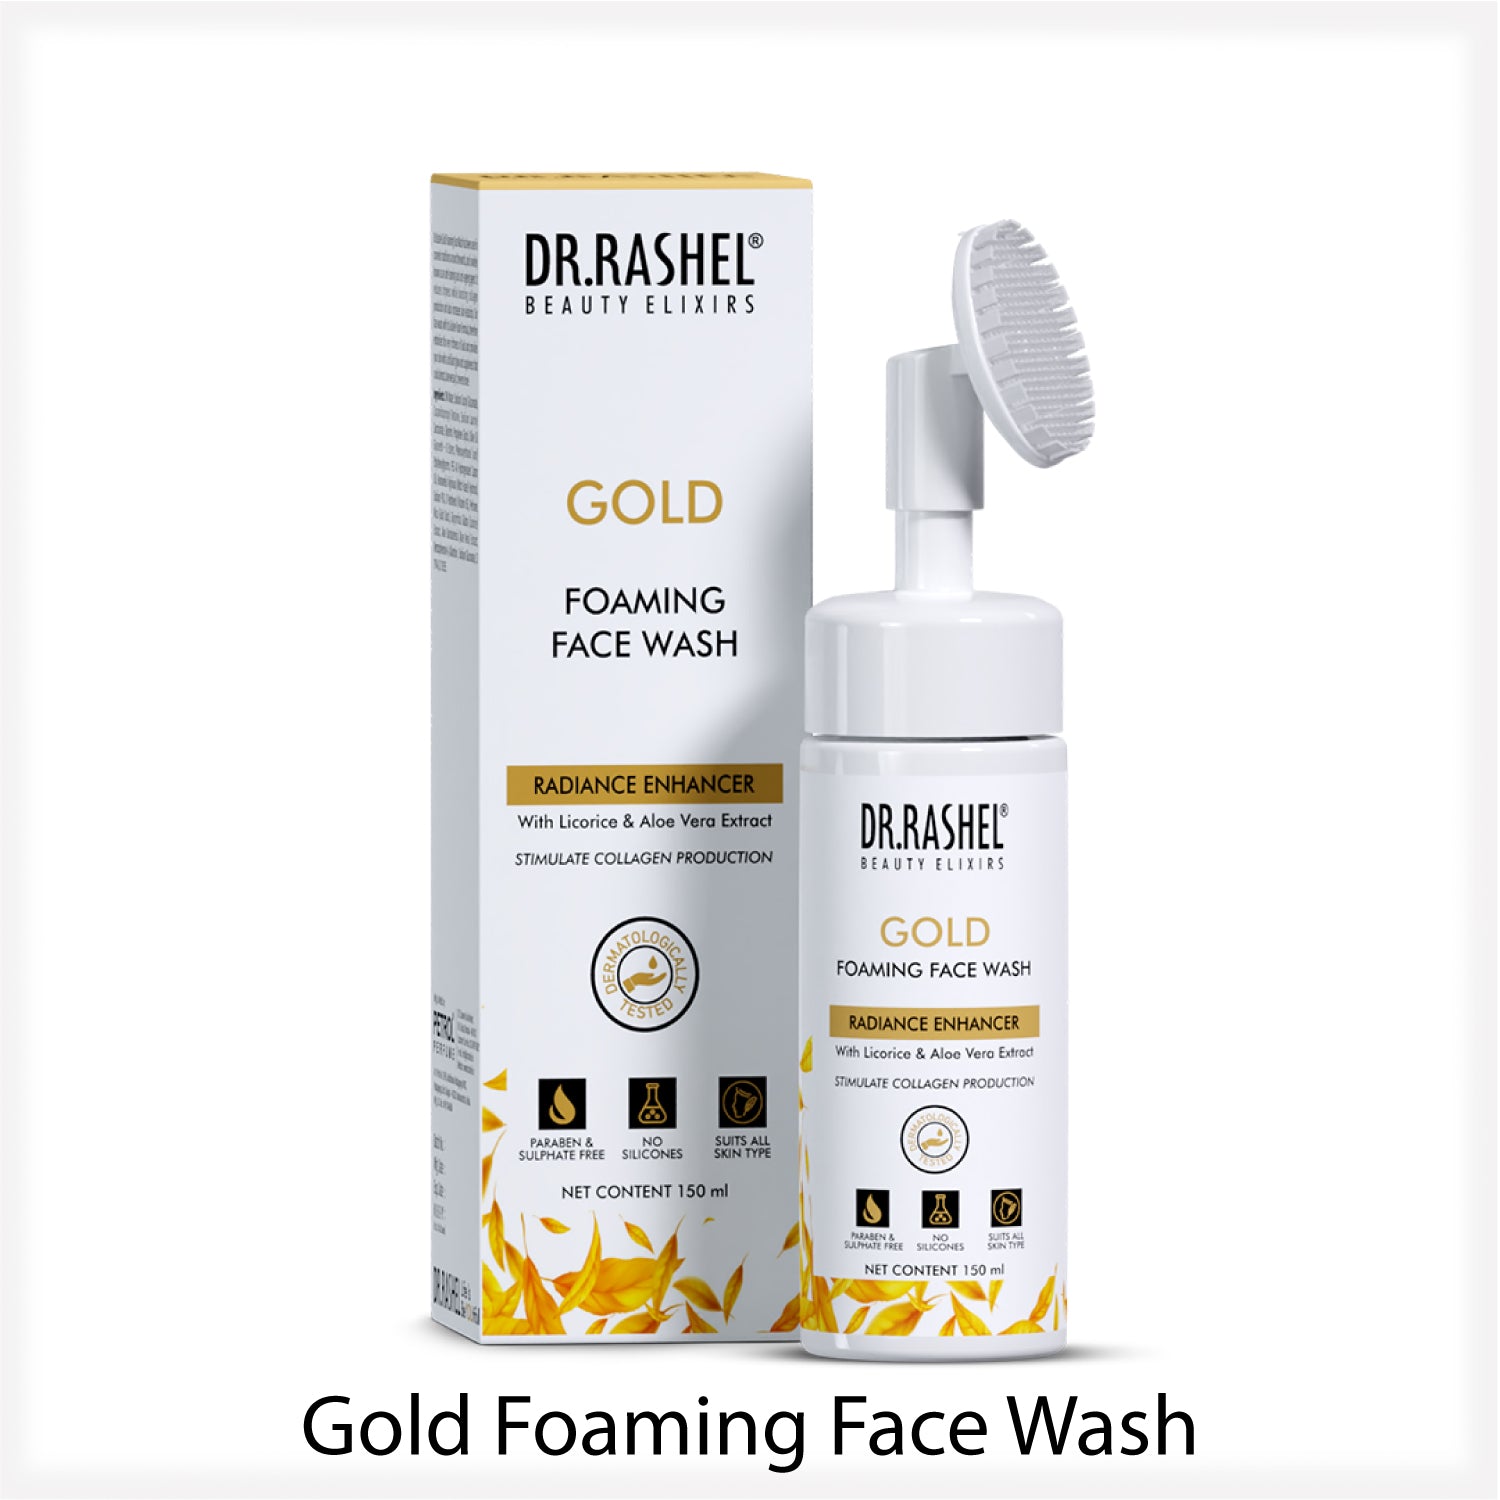 Gold Foaming Face Wash